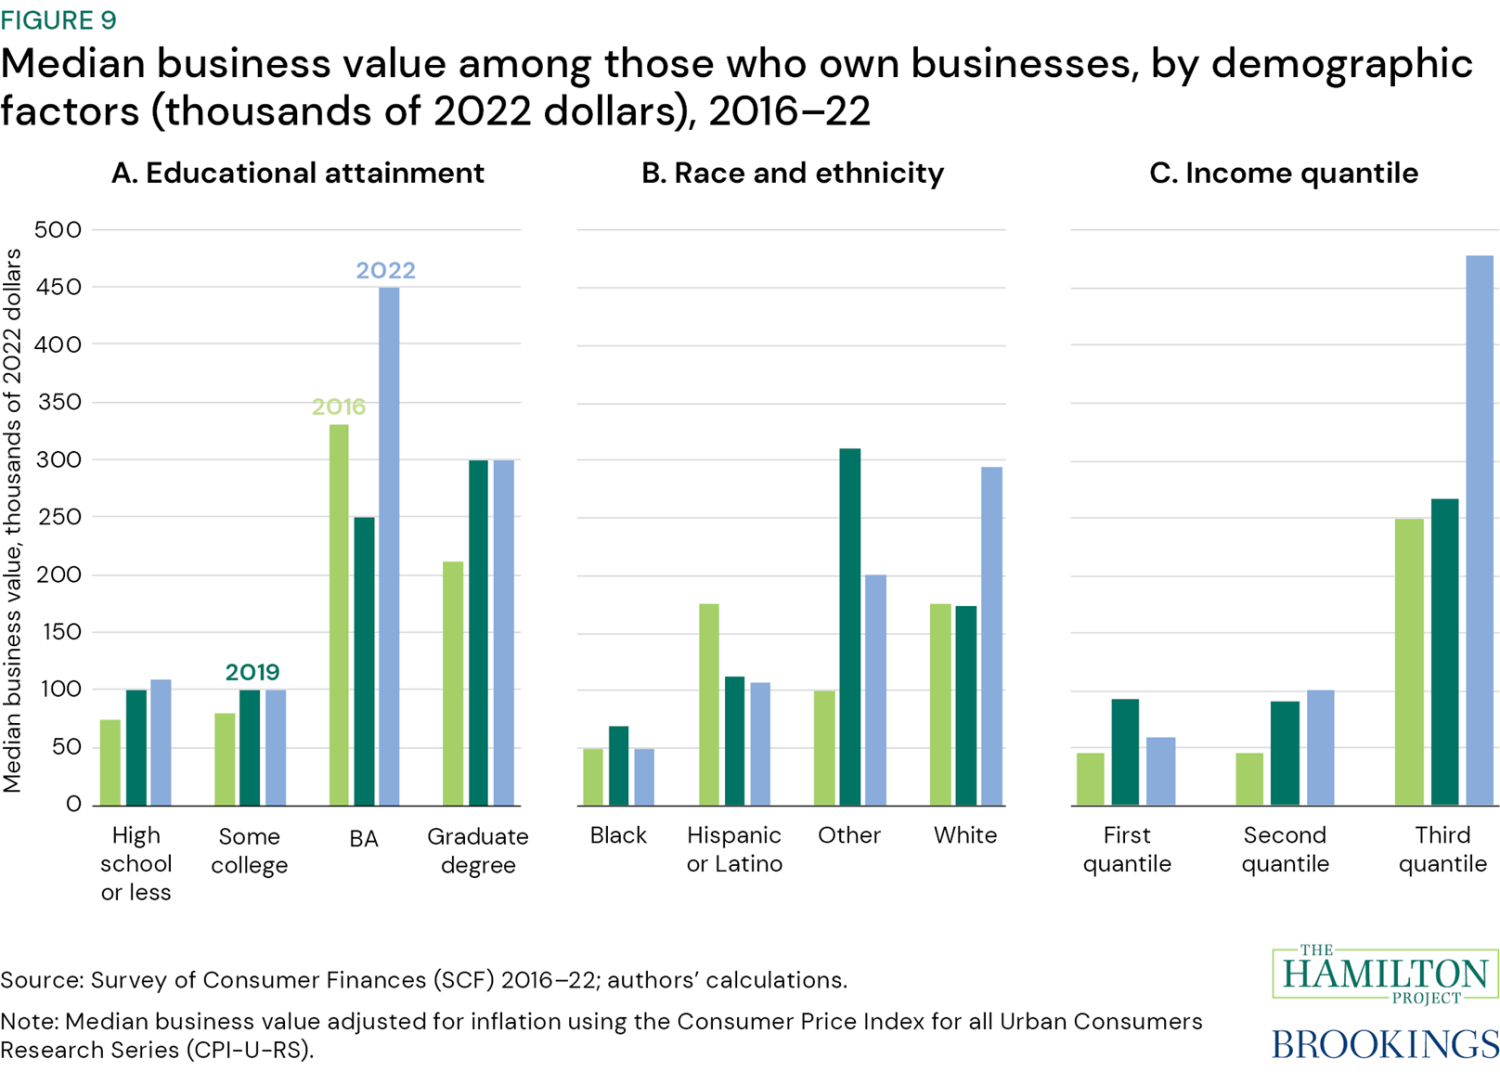 Figure 9: Median business value among those who own businesses, by demographic factors (thousands of 2022 dollars), 2016-22. Figure 9 shows the median value of these businesses among those who owned businesses for the same groups.